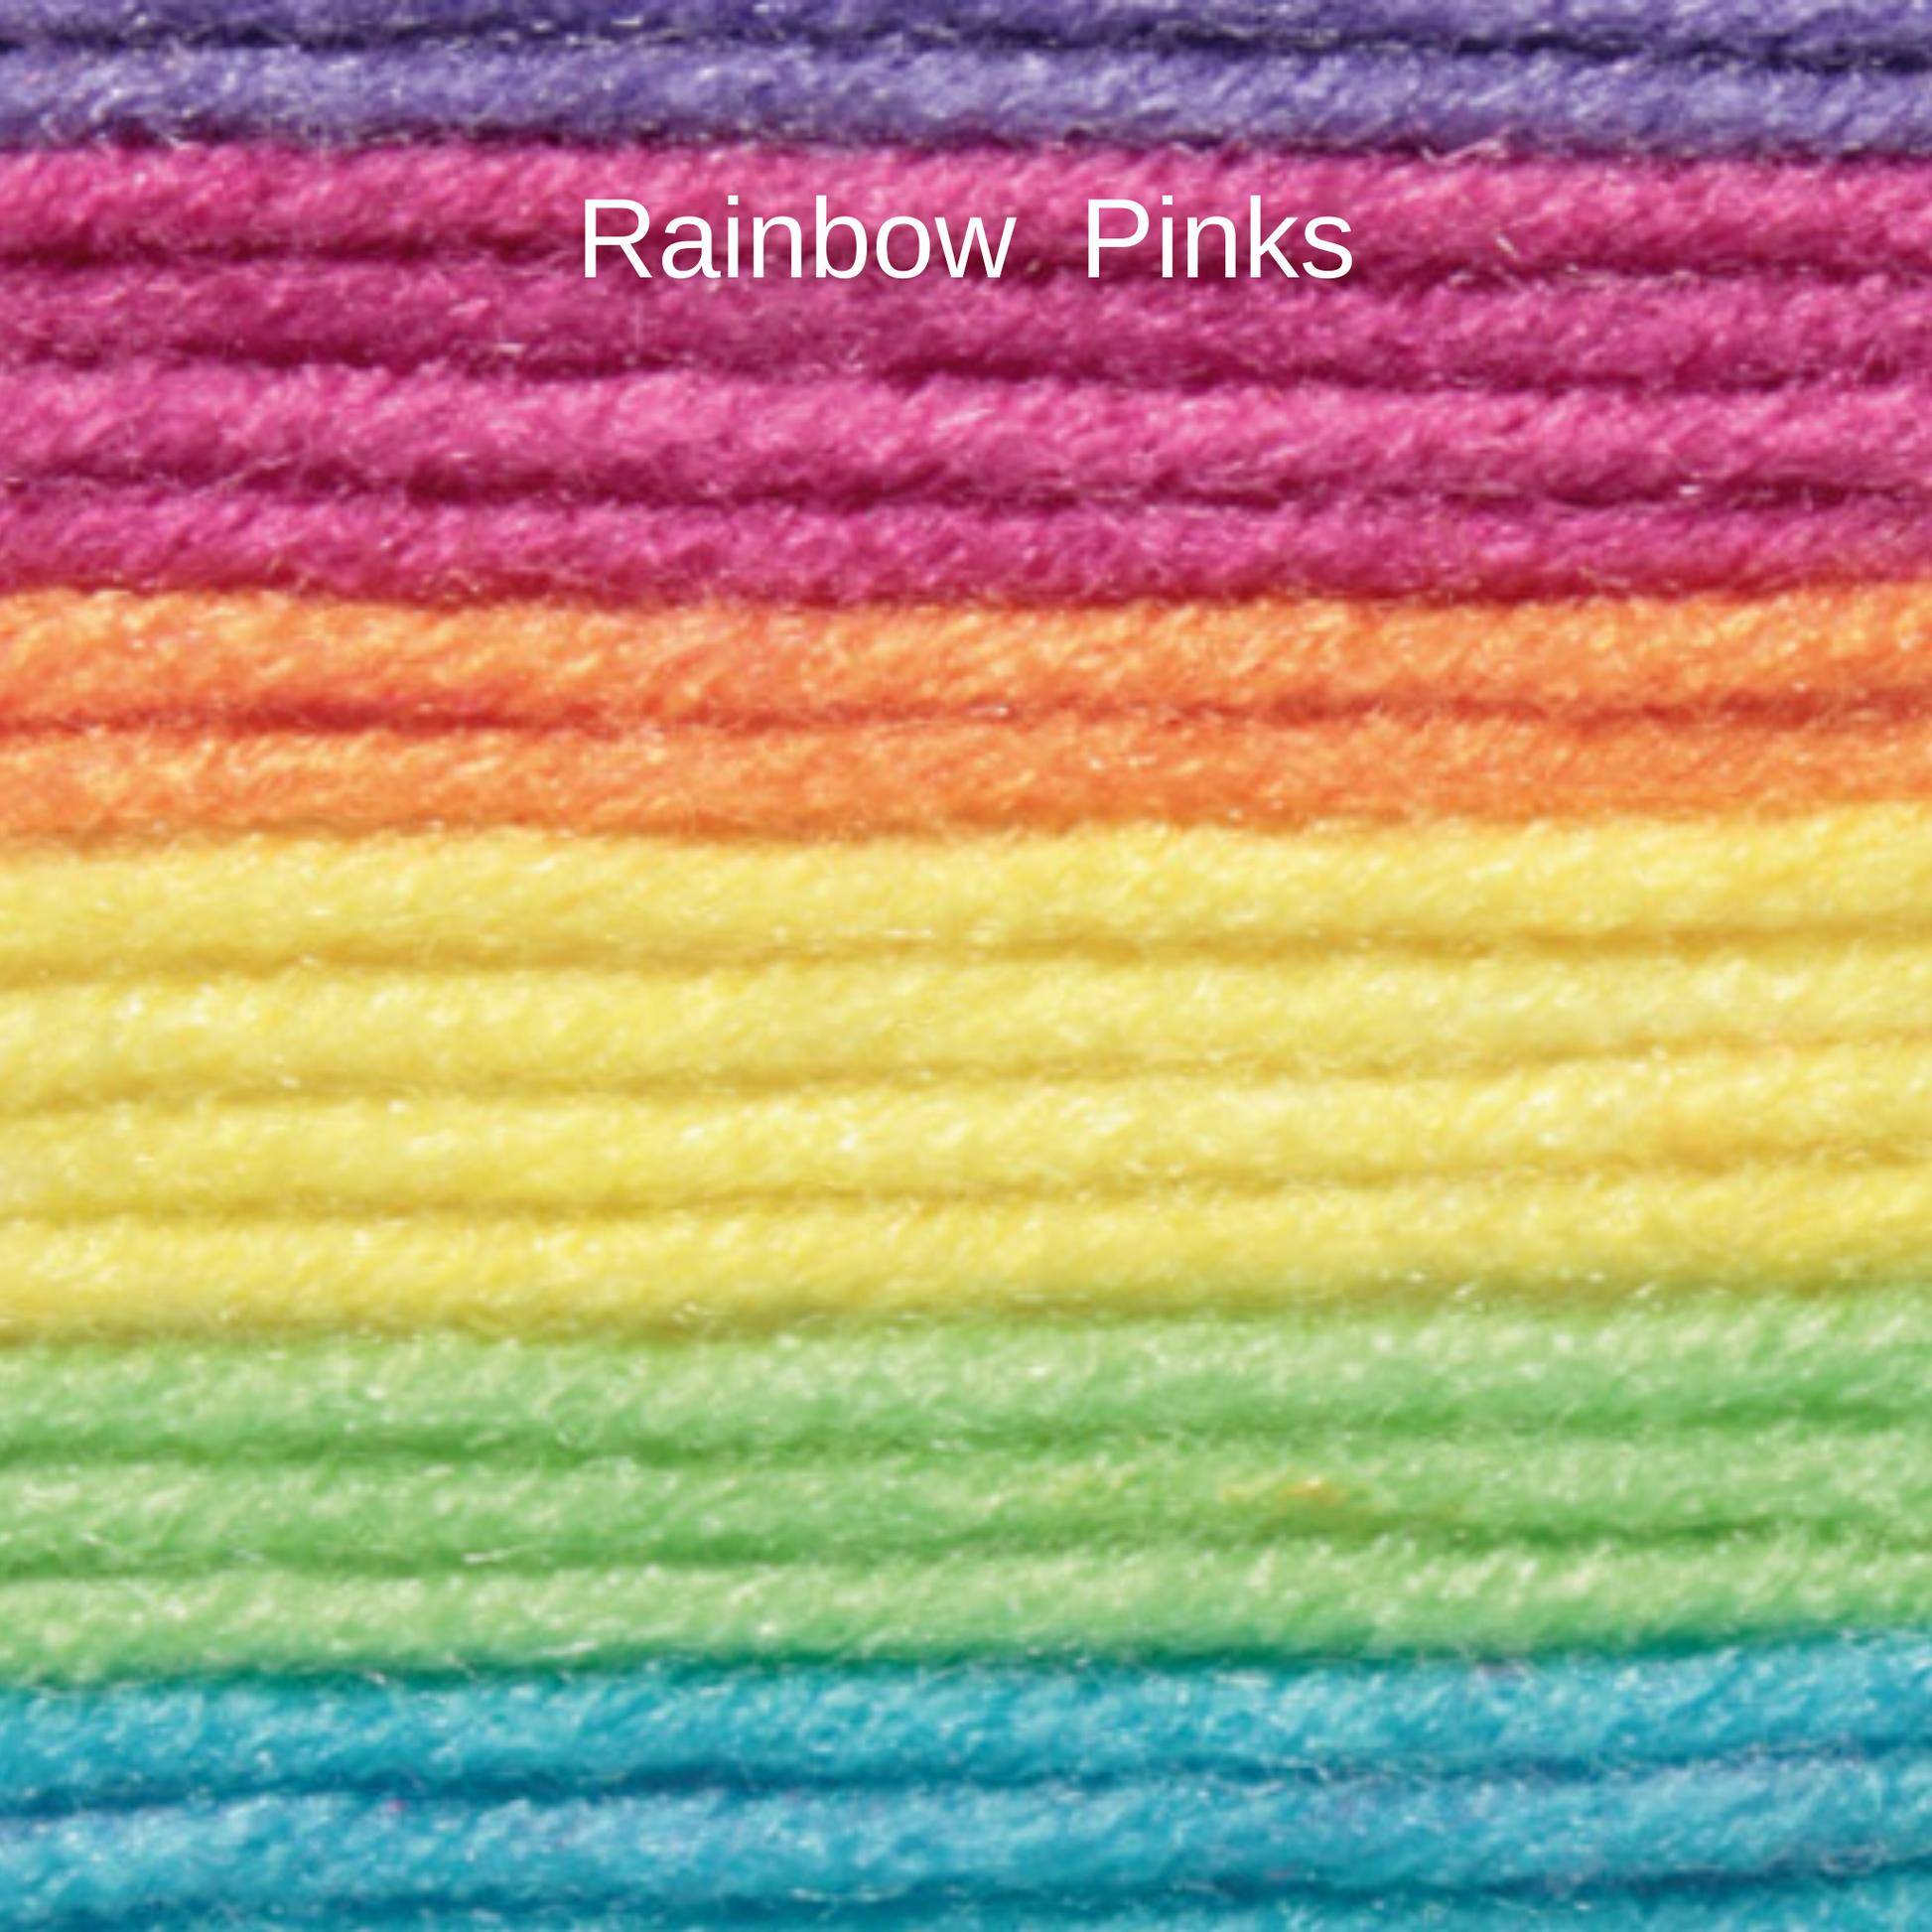 Colours in Rainbow Pinks Wool option- purple, pink, orange, yellow, green and blue